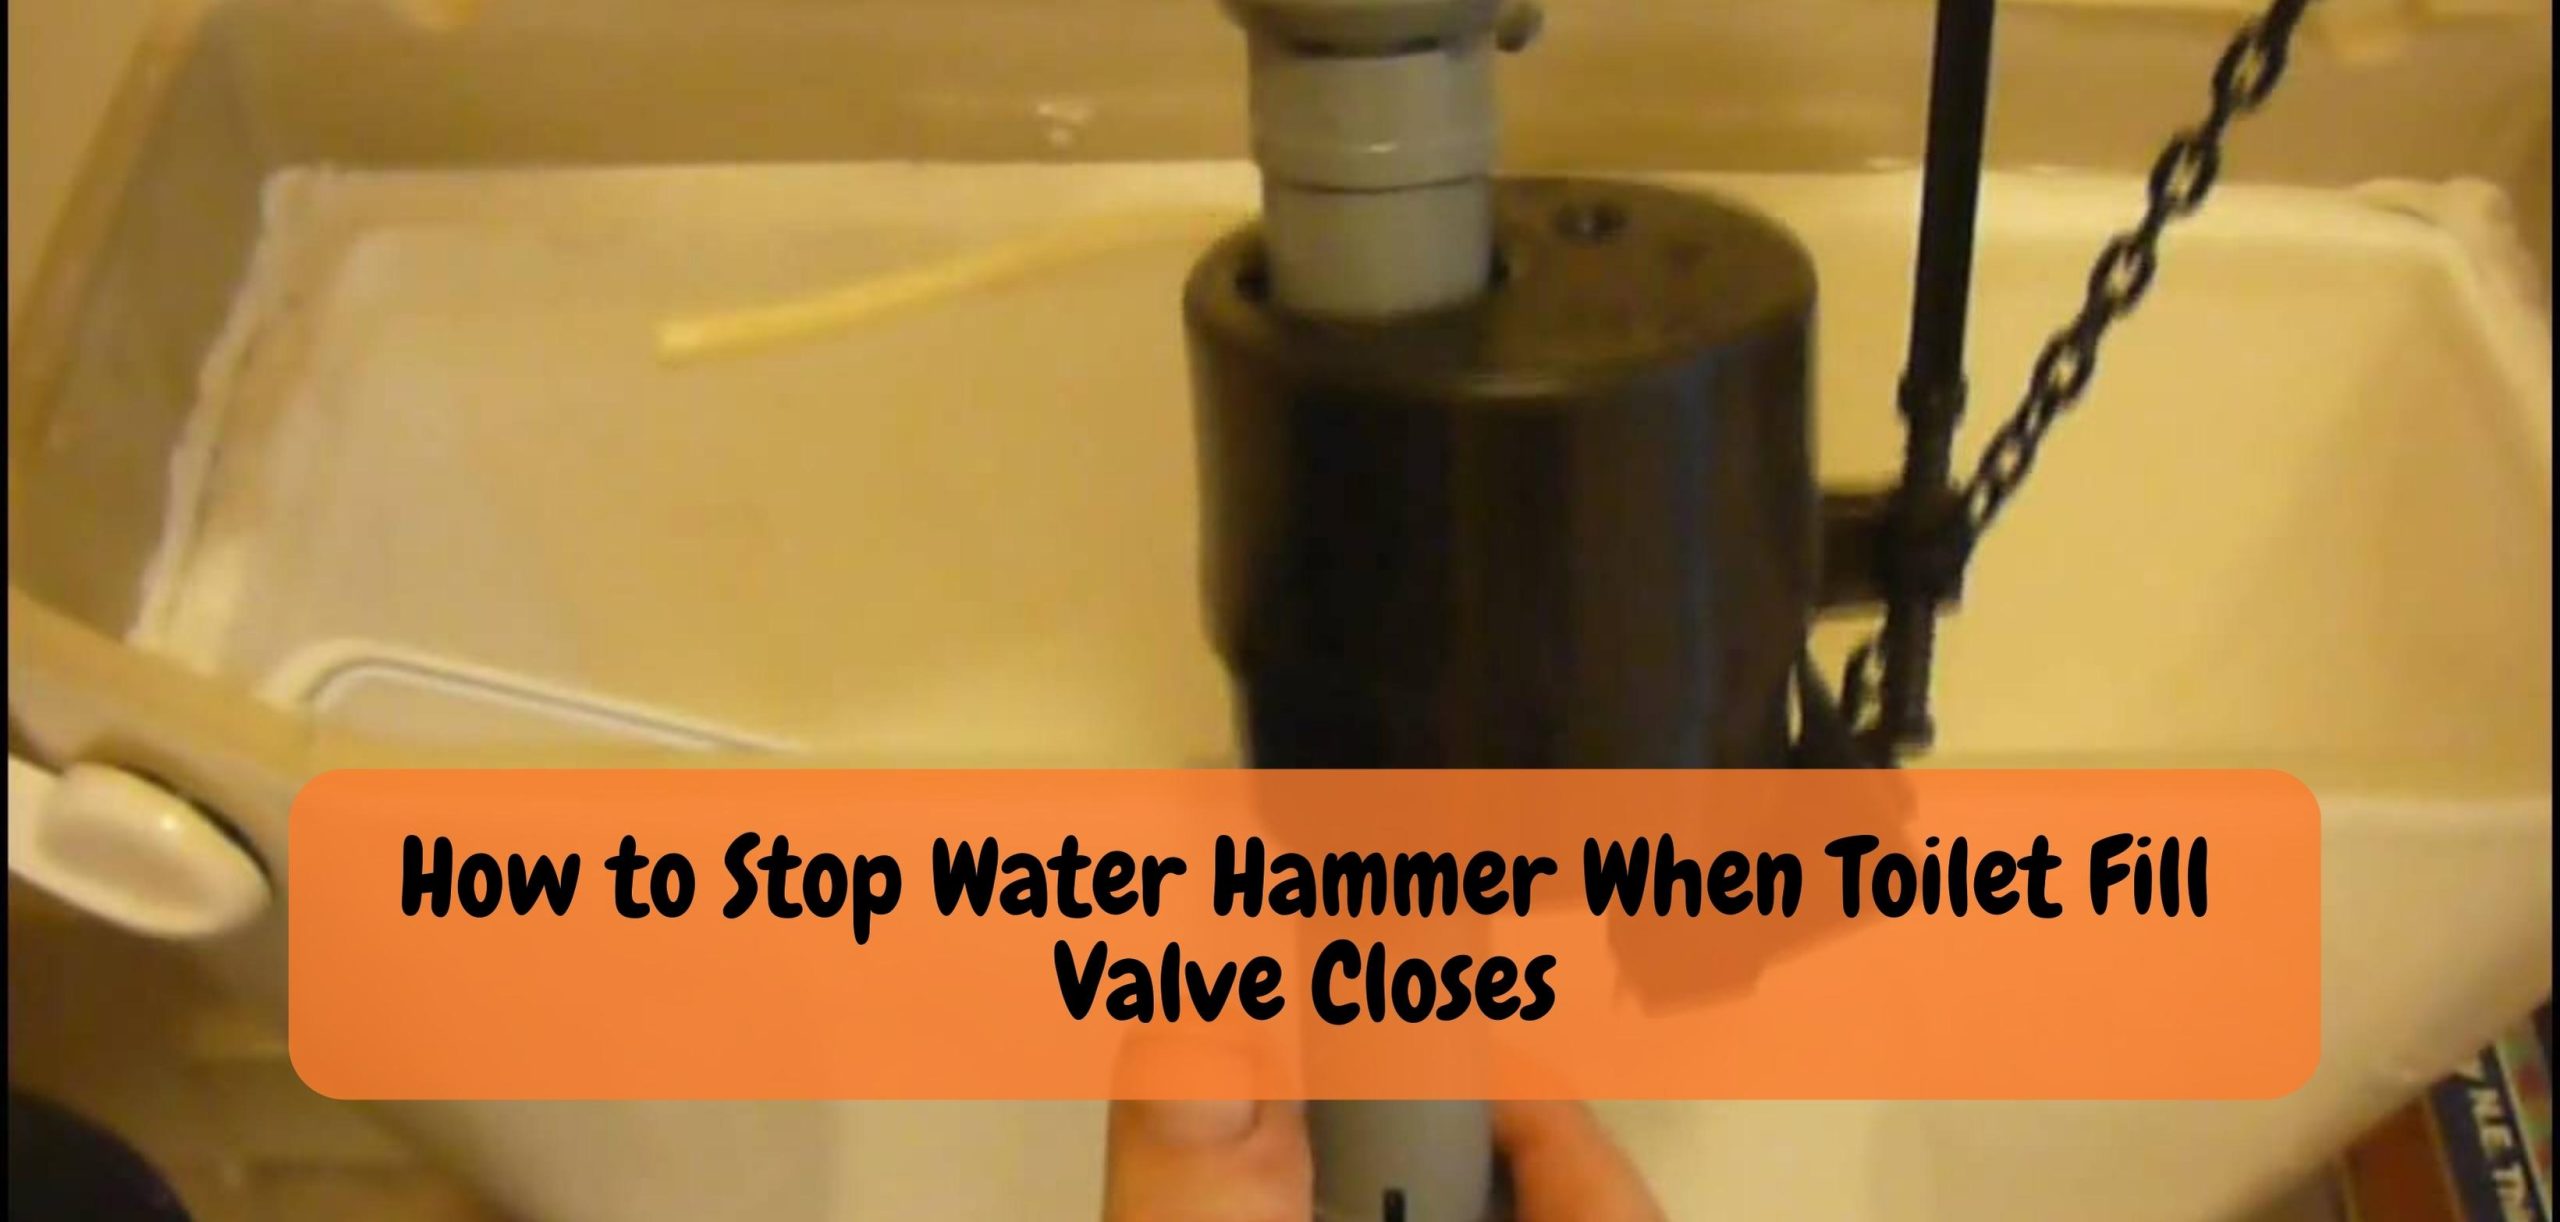 How to Stop Water Hammer When Toilet Fill Valve Closes